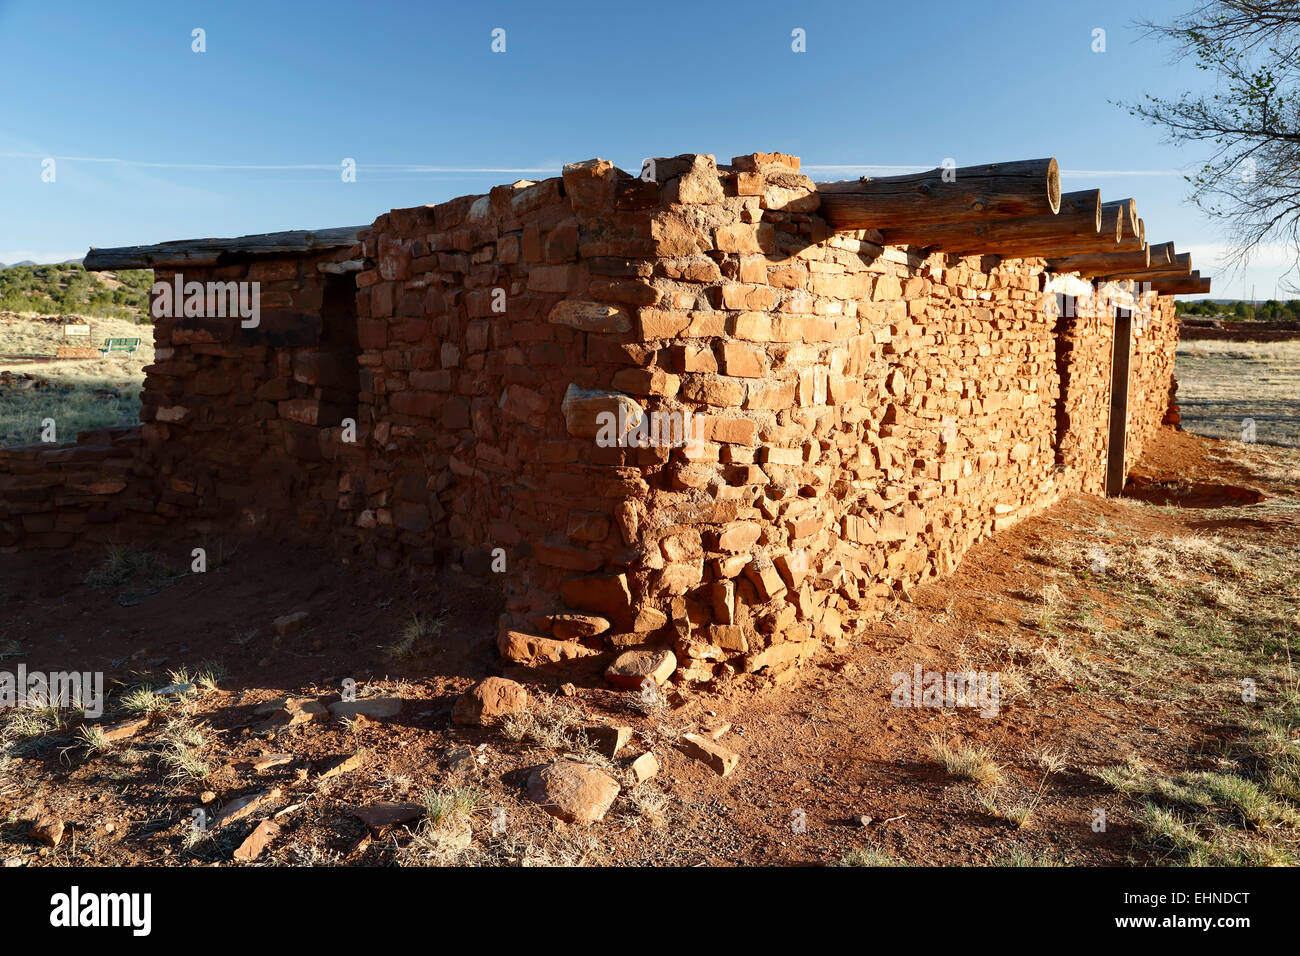 Stone house, Salinas Pueblo Missions National Monument, New Mexico USA Stock Photo